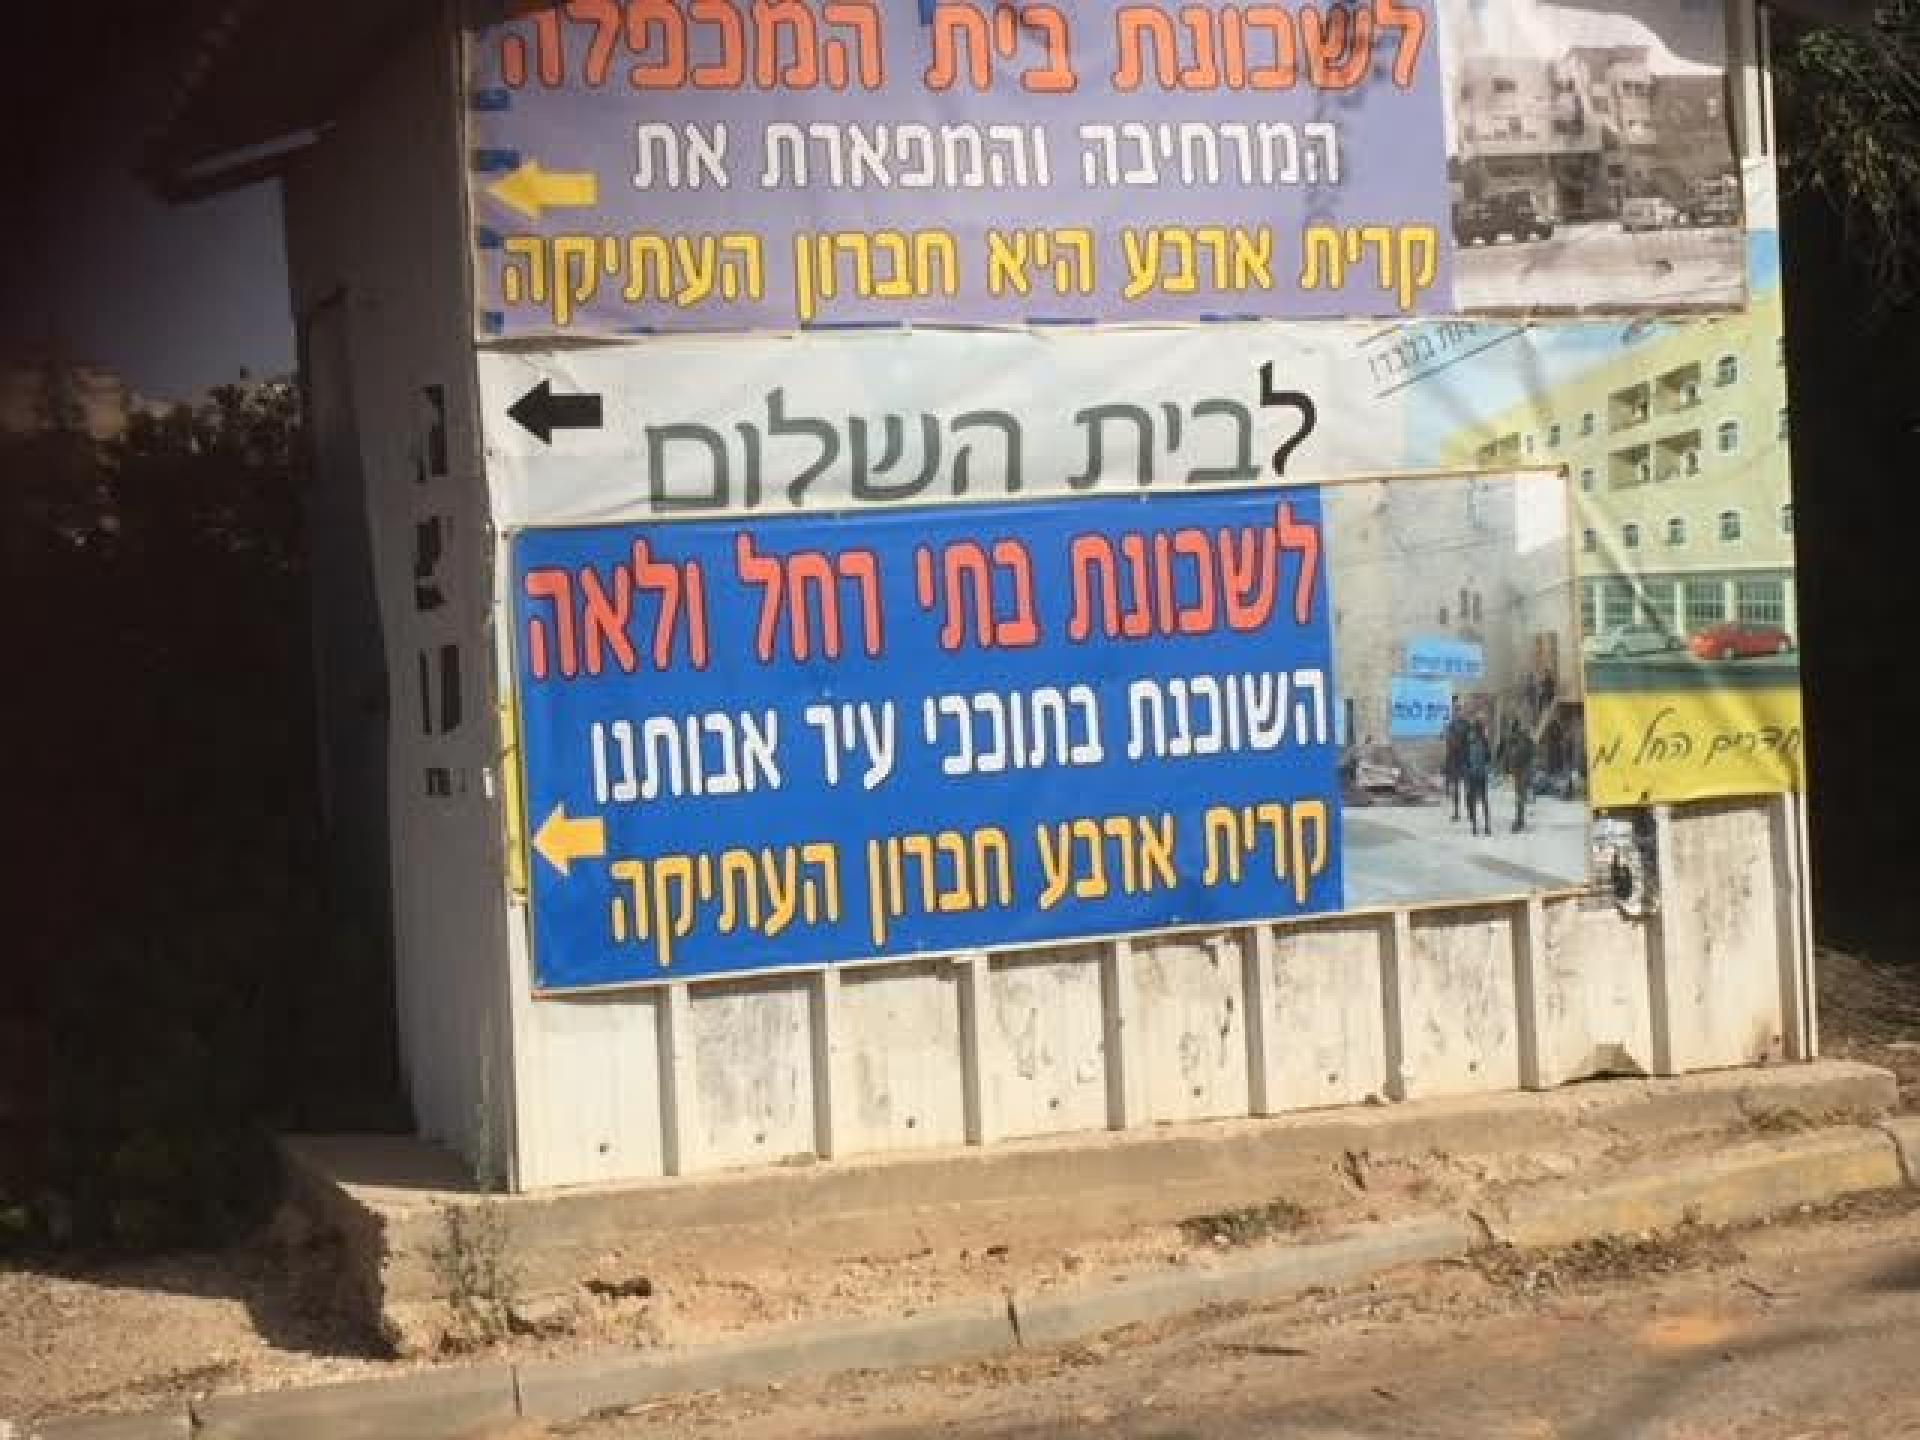 At the exit from Kiryat Arba towards Hebron, this banner is hanging